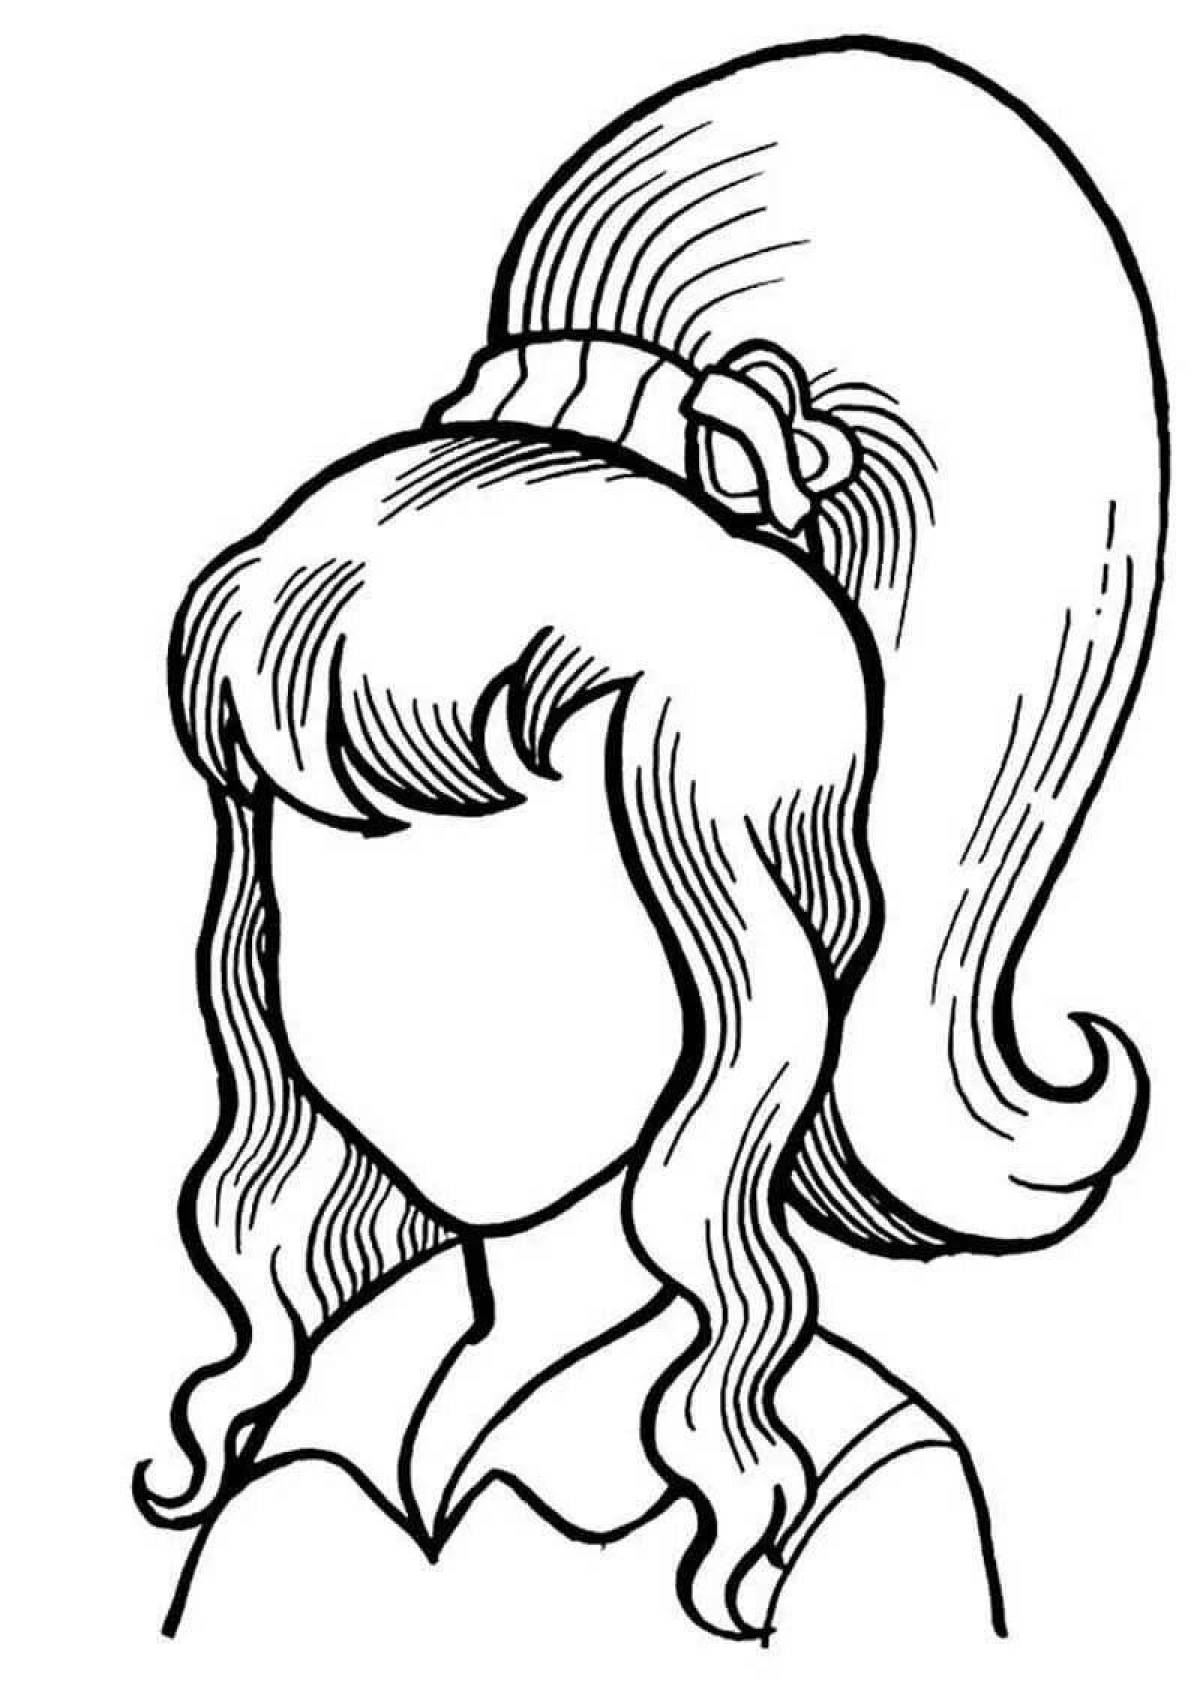 Happy face coloring page